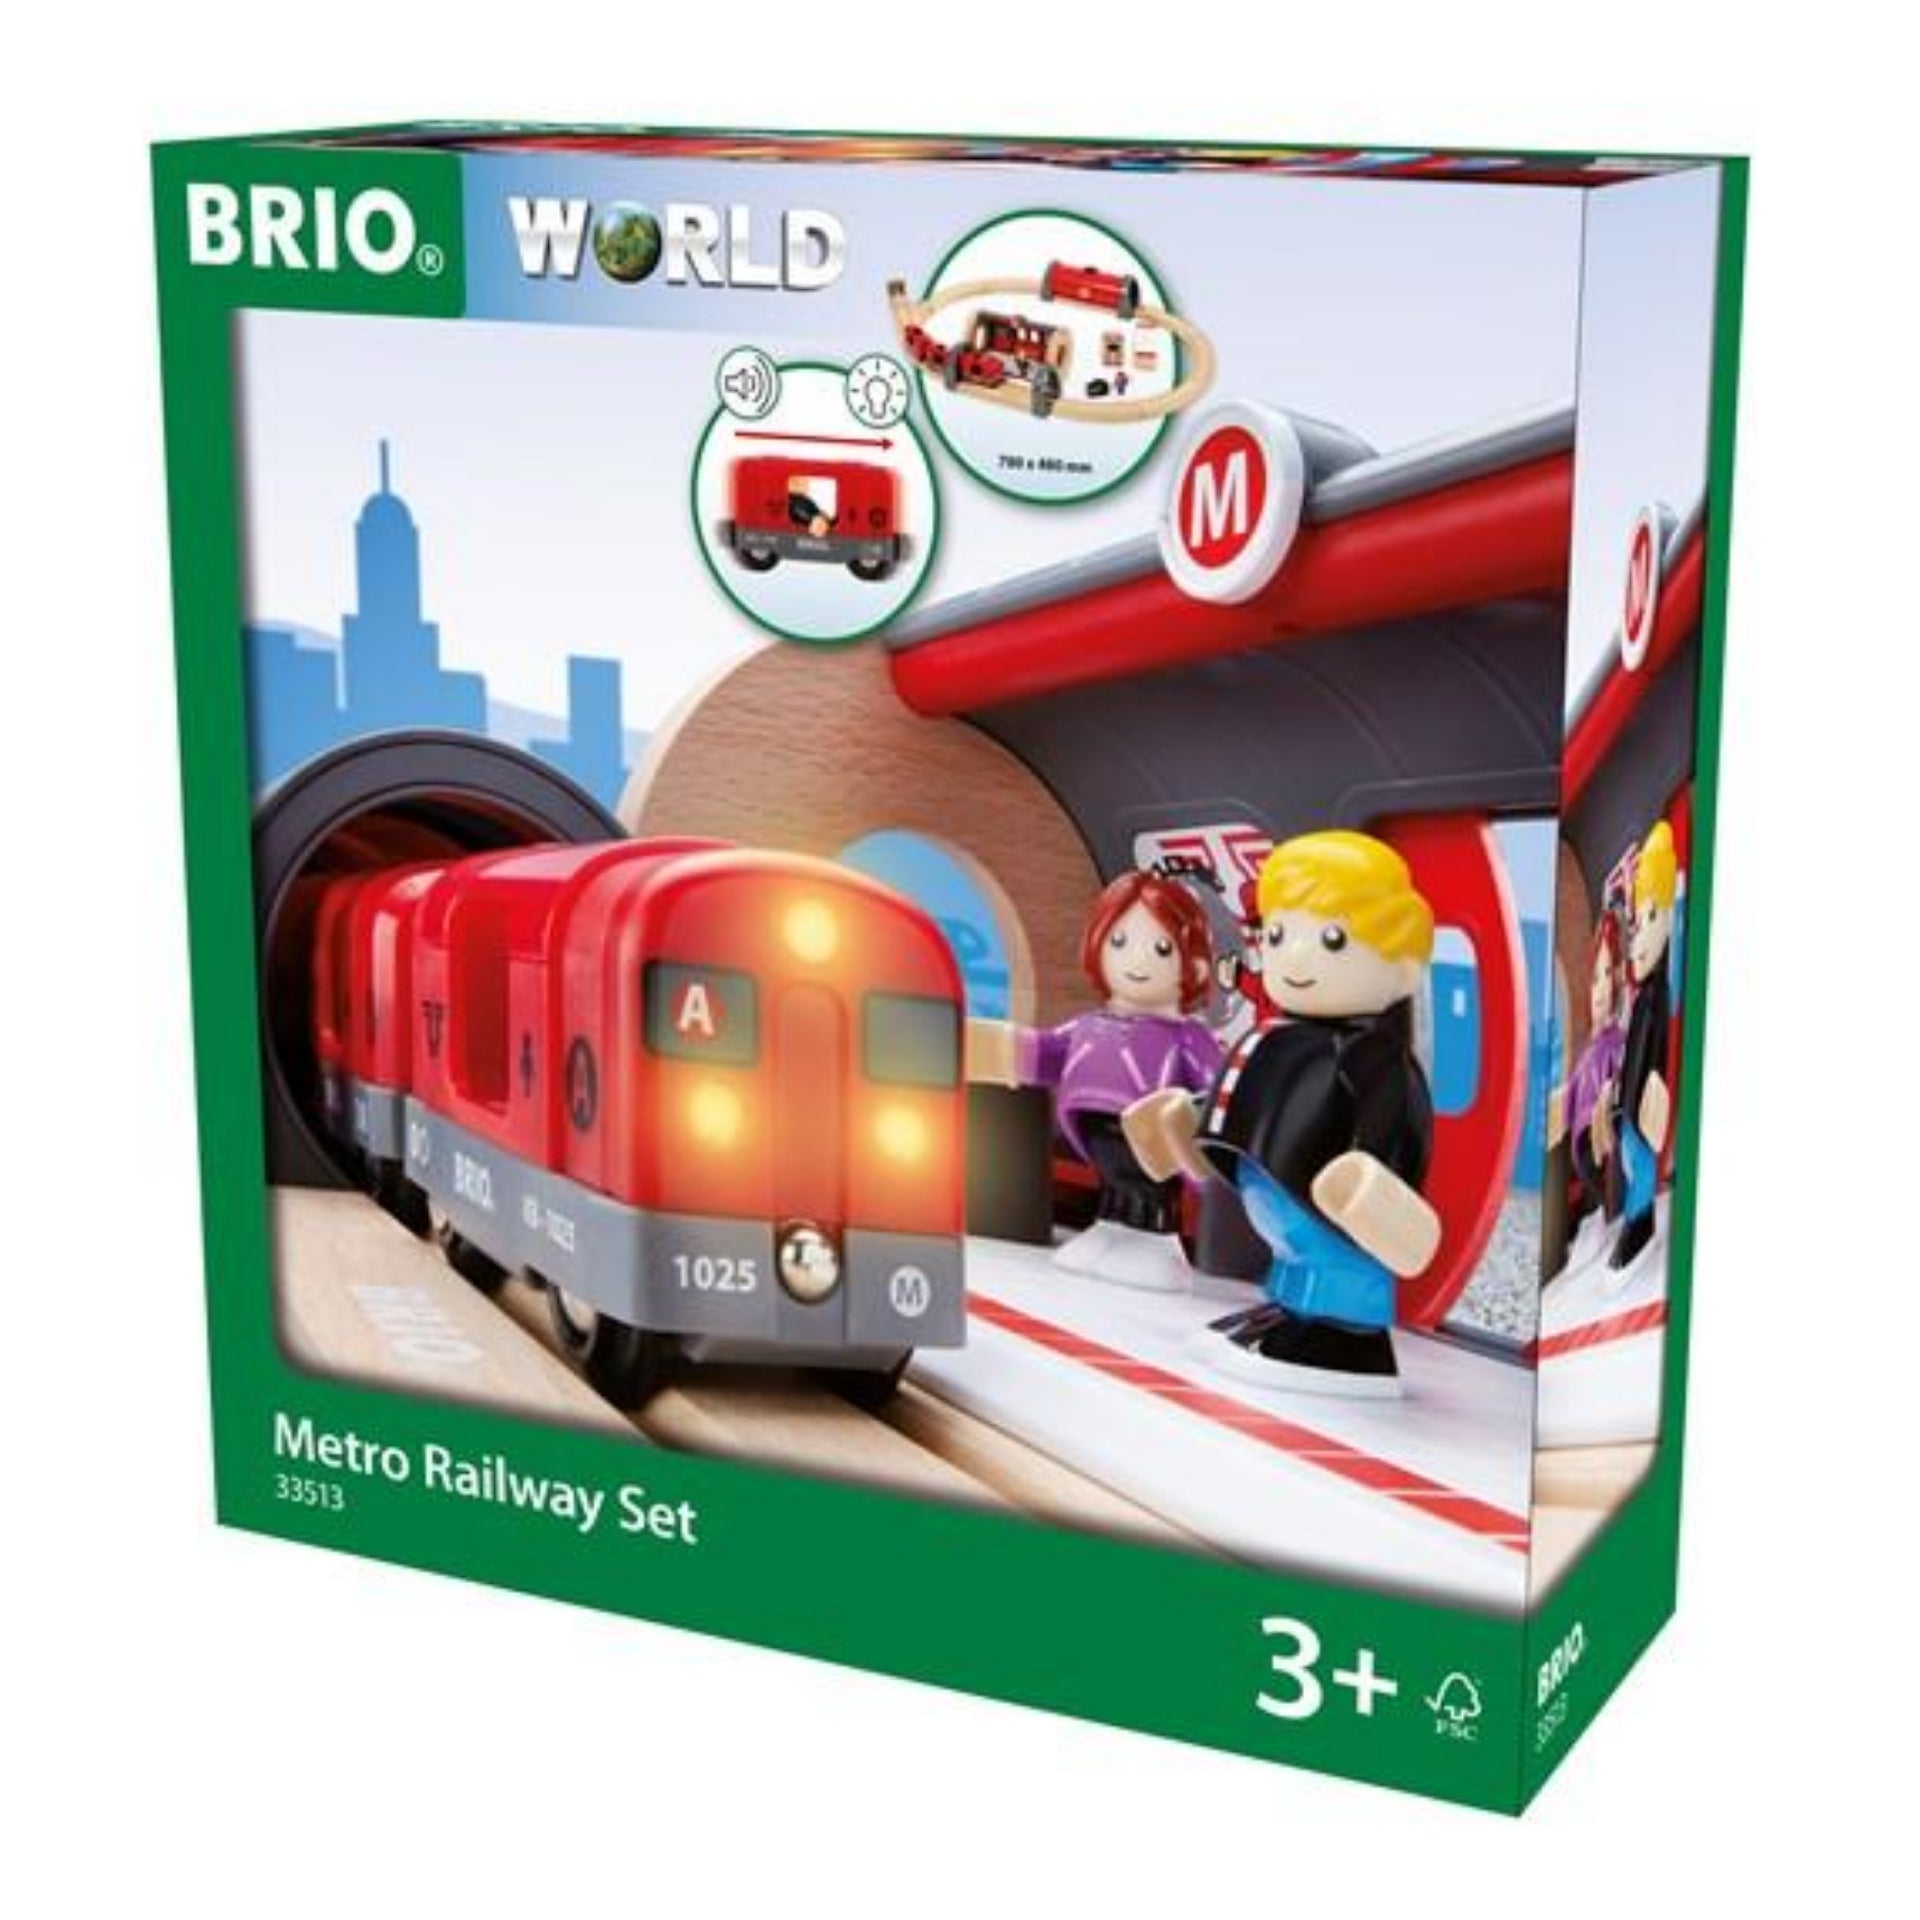 BRIO World - 33042 Little Forest Train Set  18 Piece Train Toy with  Accessories and Wooden Tracks for Kids Ages 3 and Up NEW 